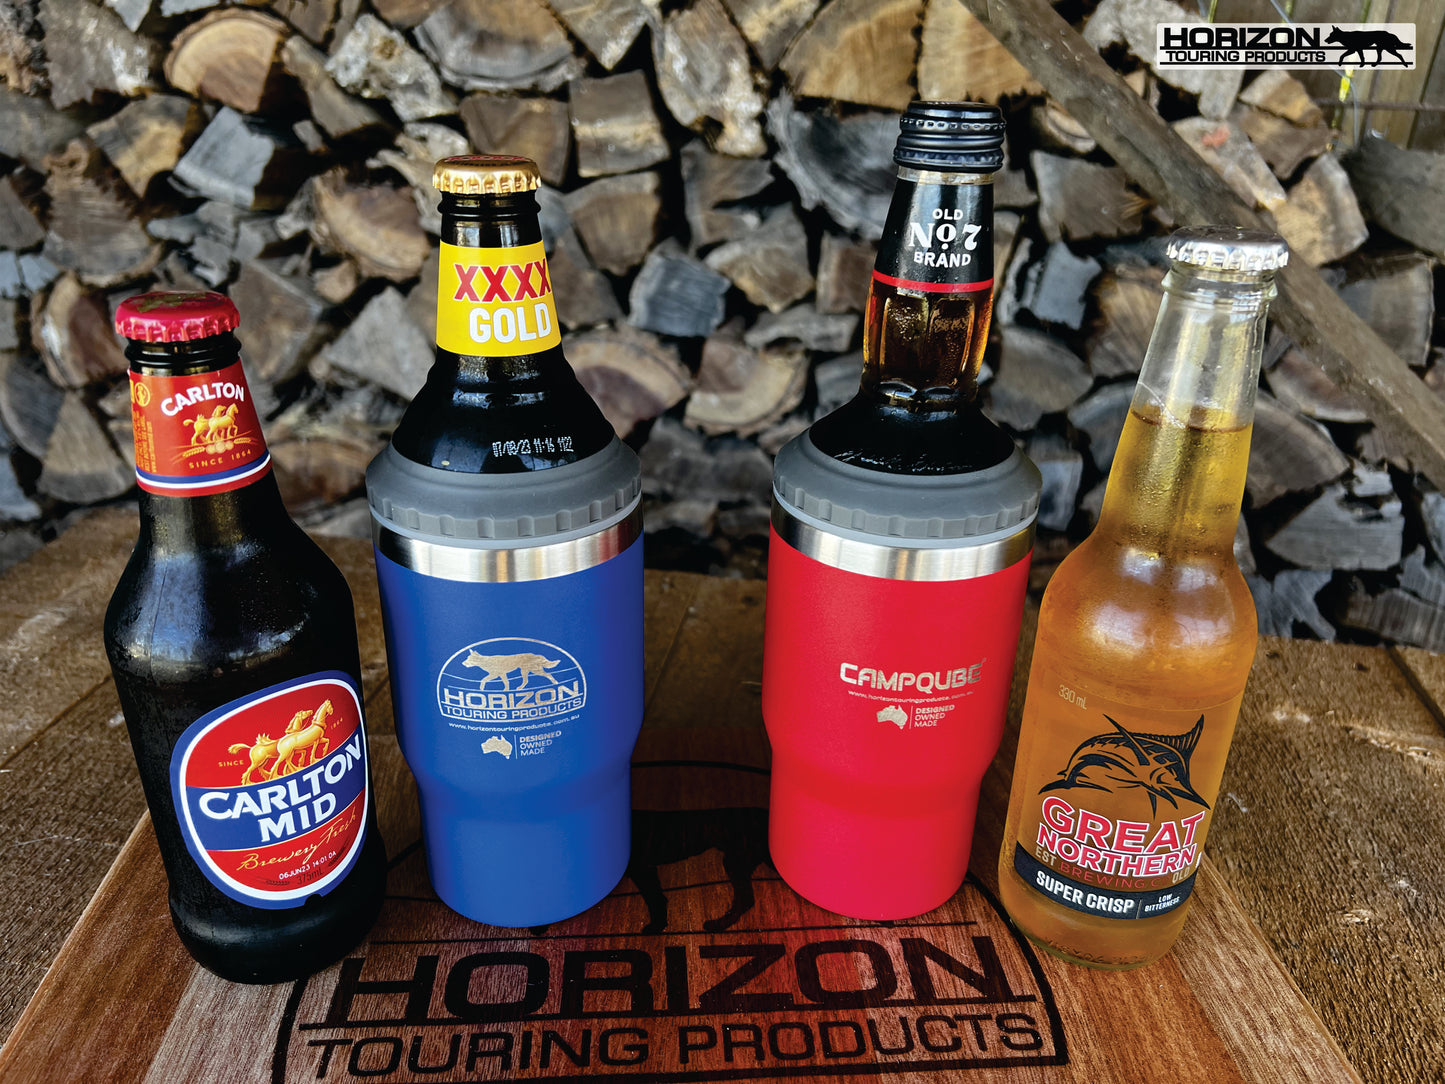 STAINLESS STEEL INSULATED TRAVEL COOLERS AND MUGS